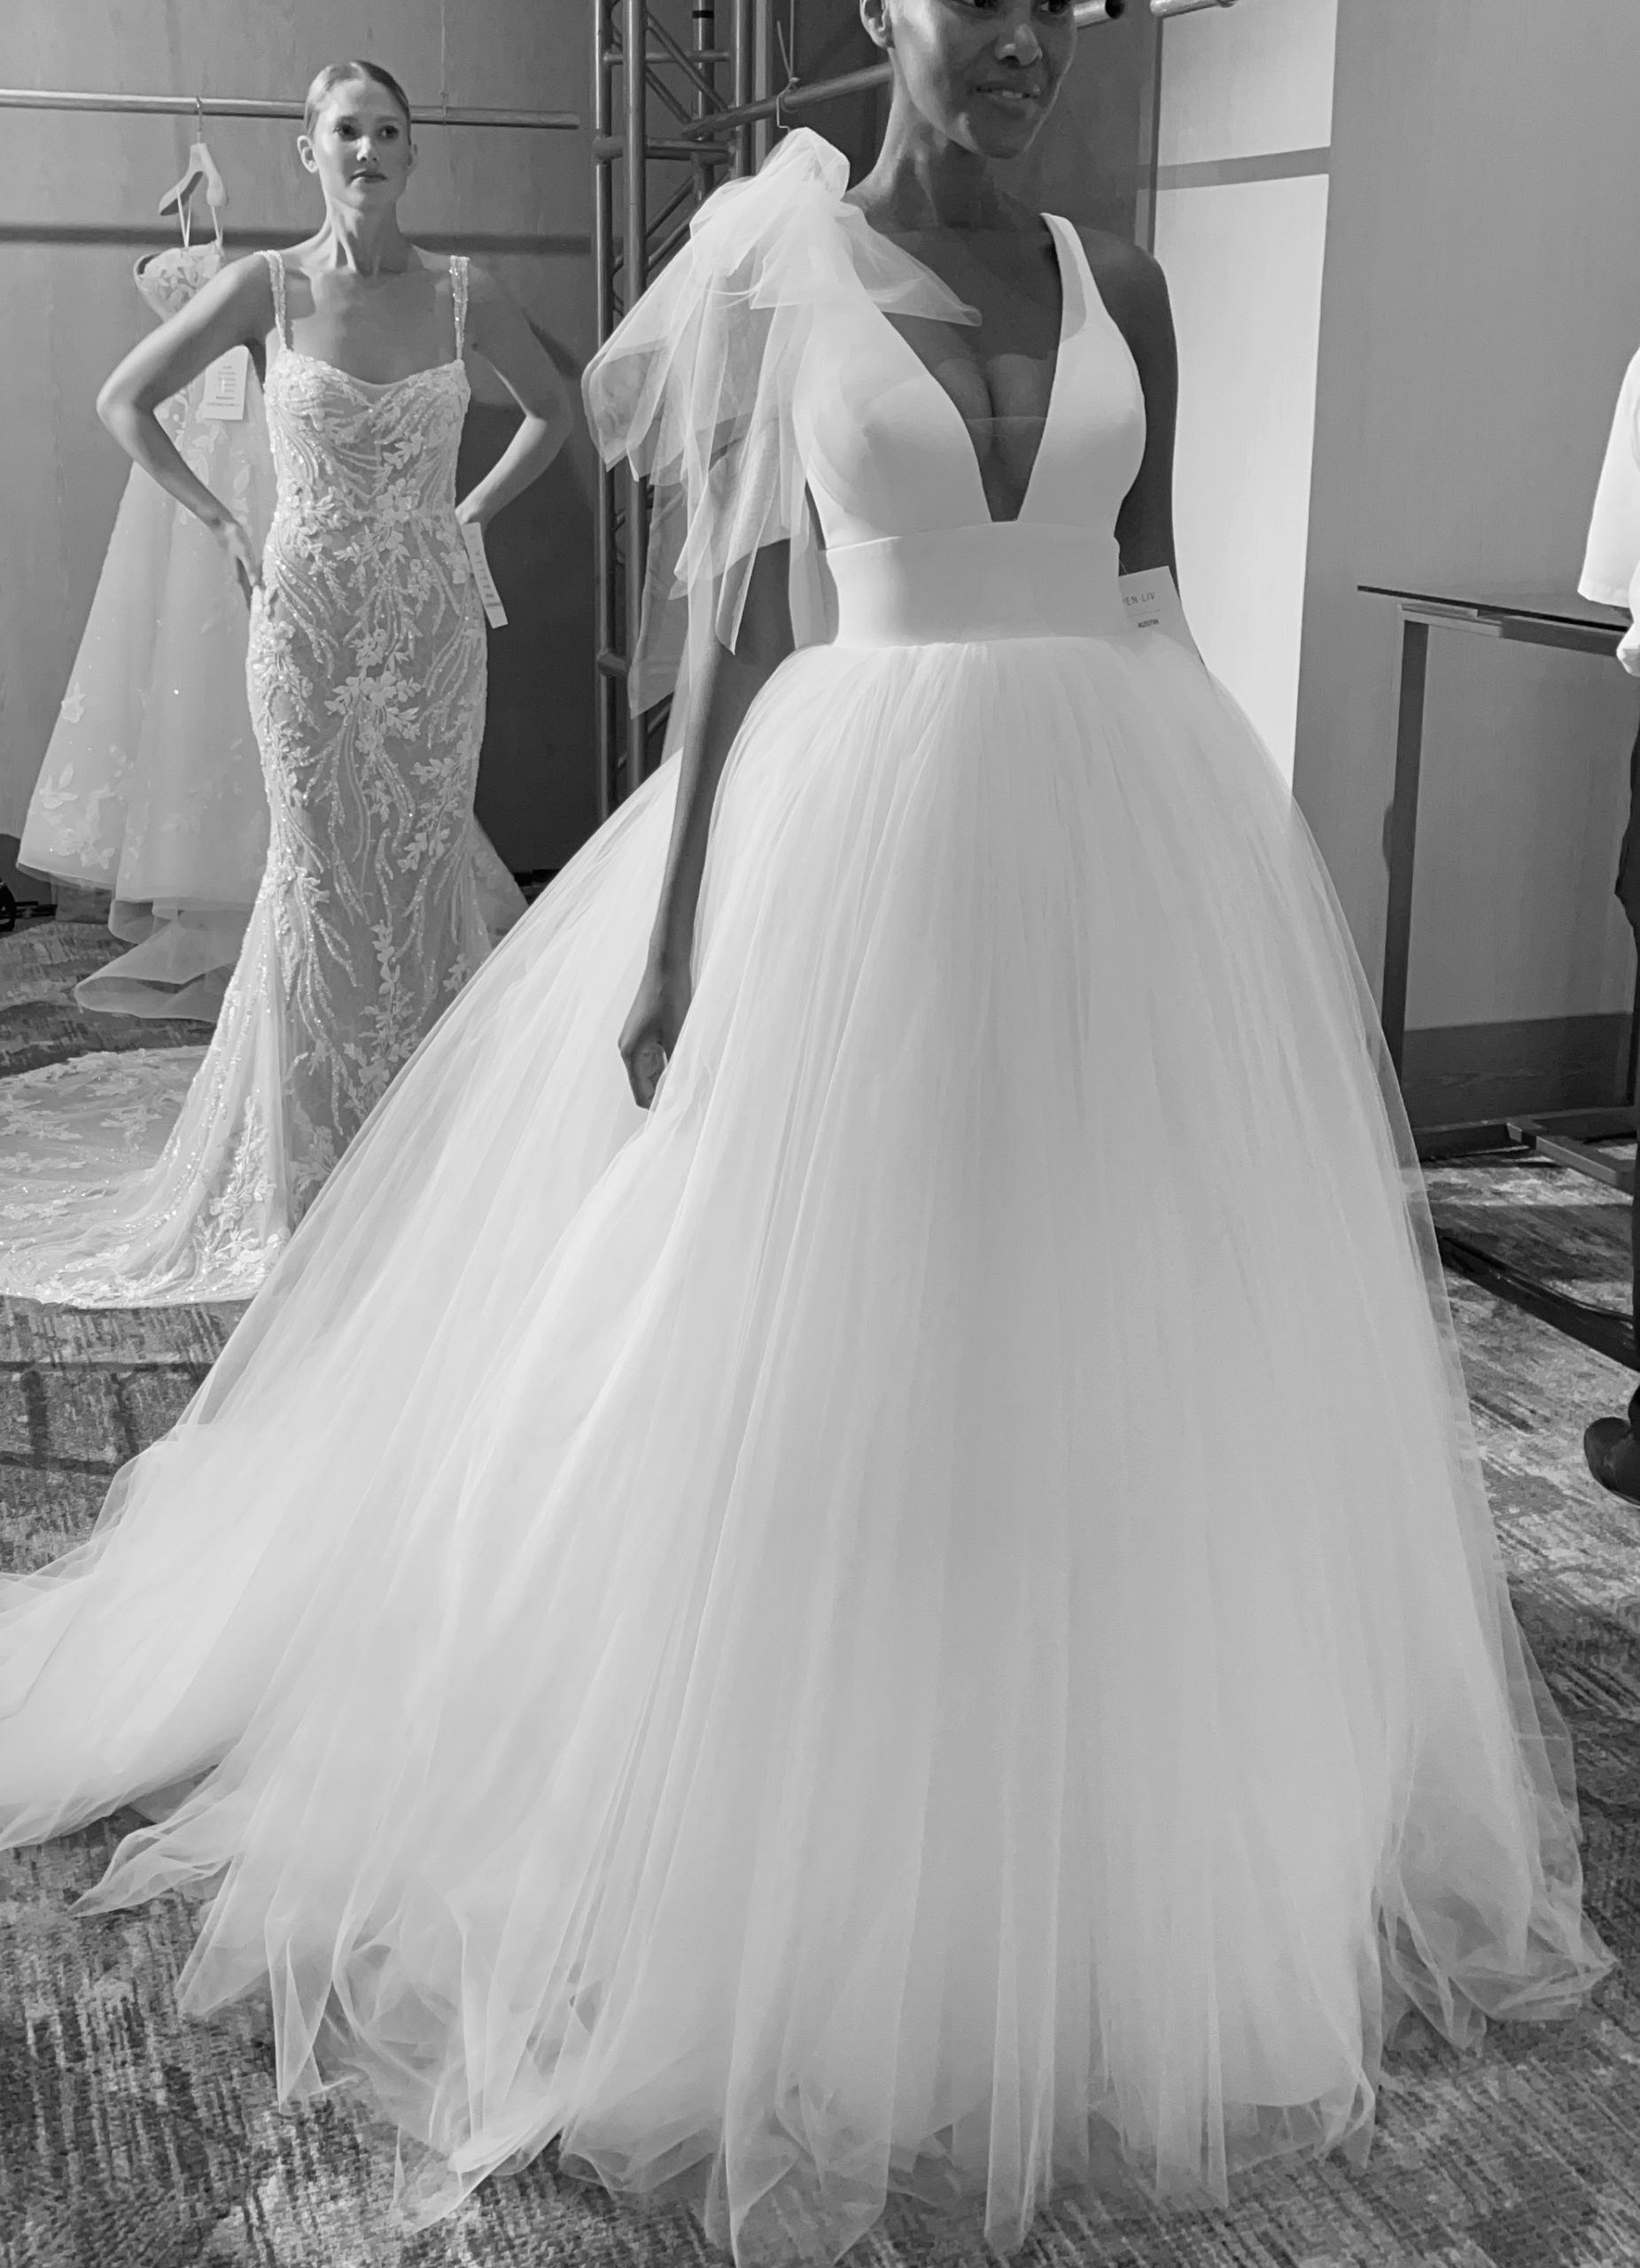 Wedding Dress Styles: 22 Shapes & Necklines You Need to Know -   